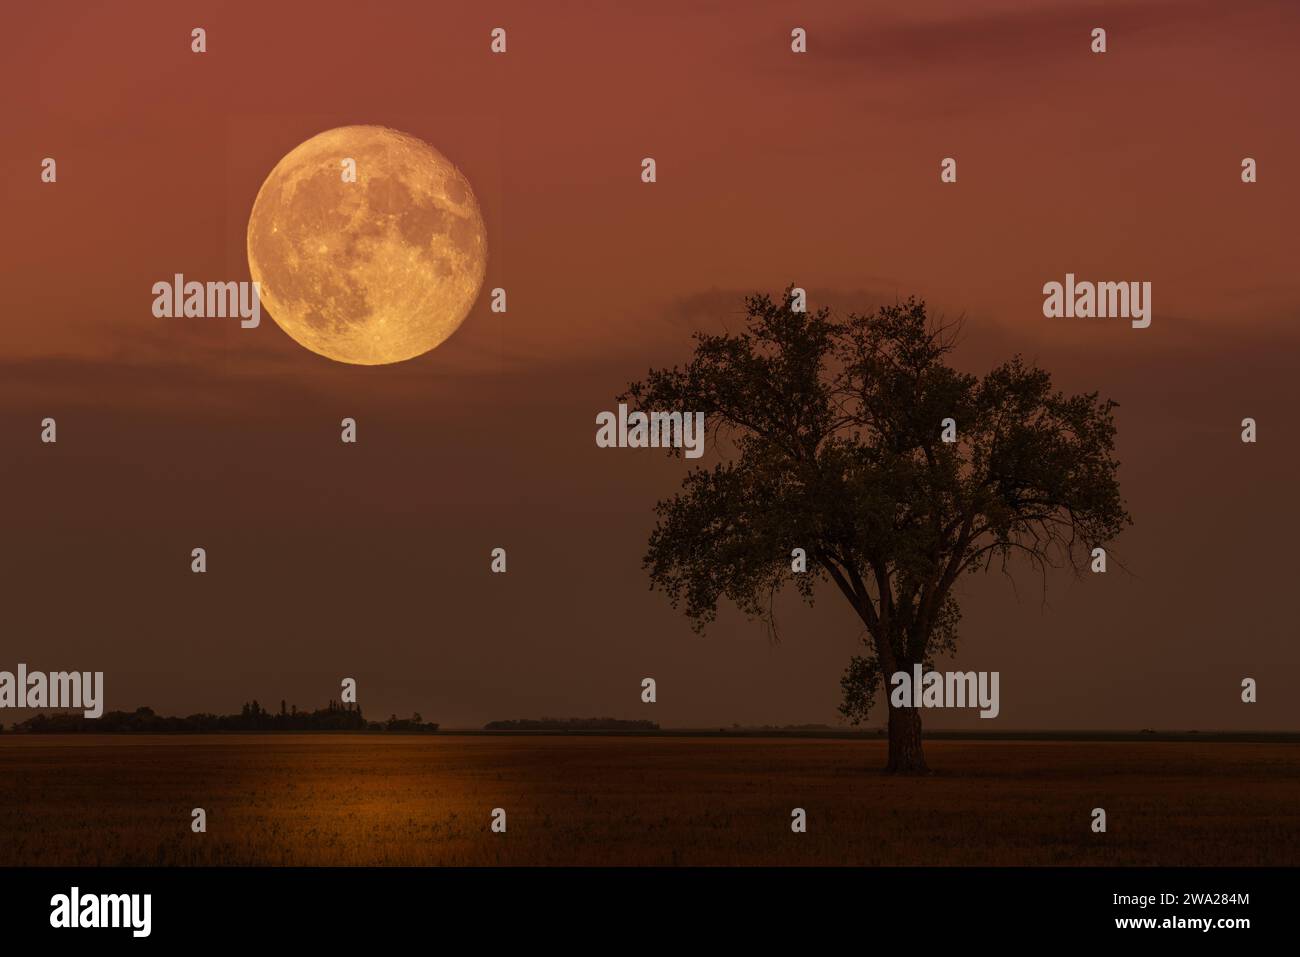 The supermoon rise at the lone tree on the prairies at Myrtle, Manitoba, Canada. Stock Photo